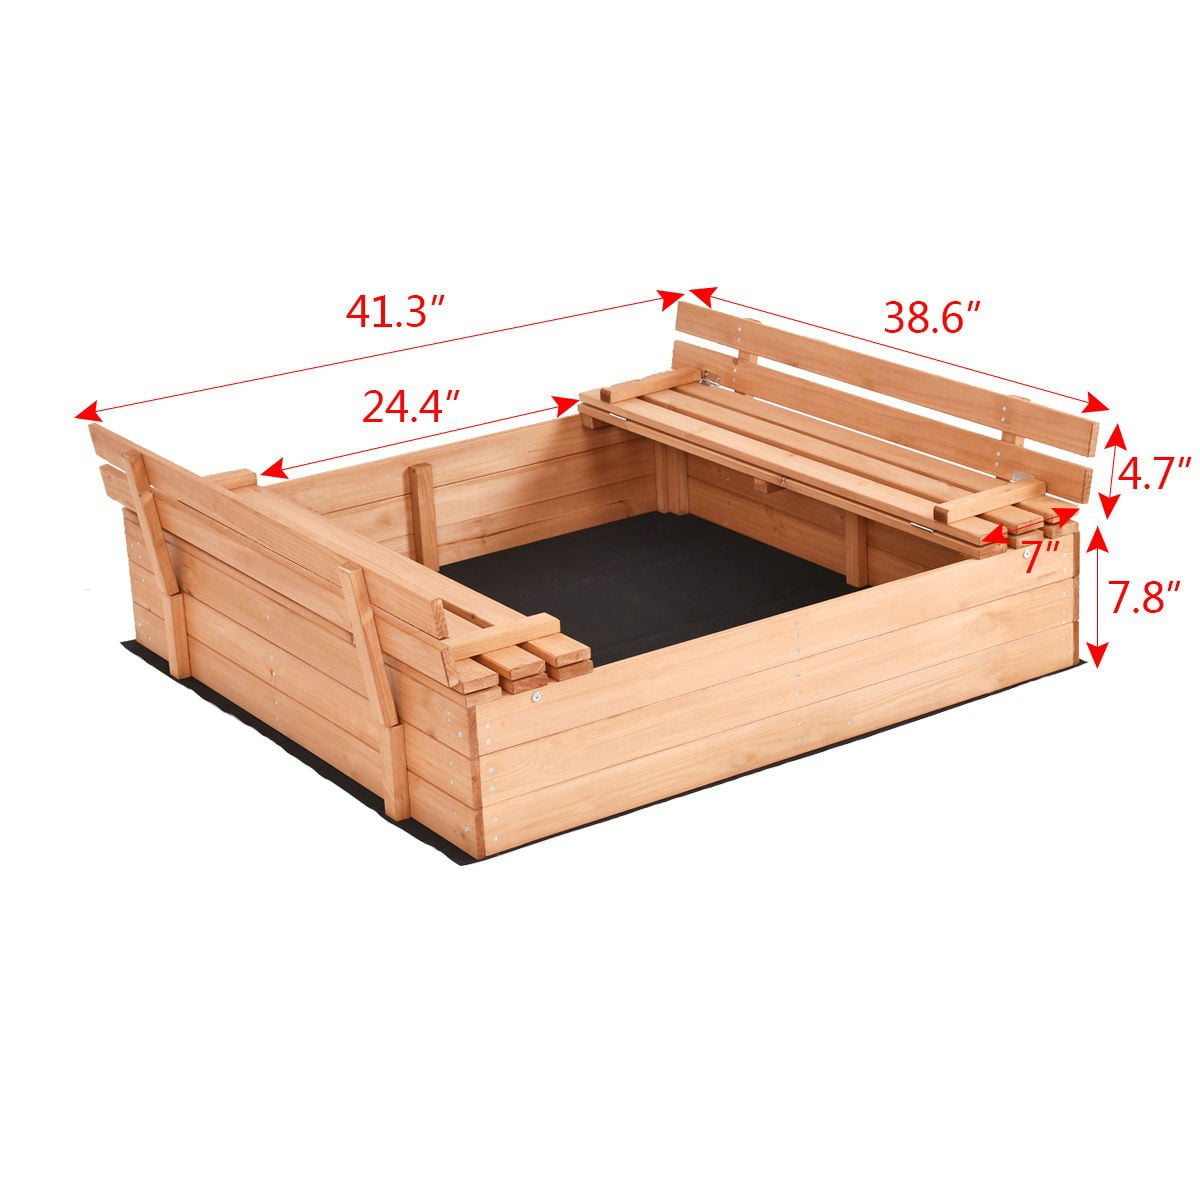 simplyUSAhello Kids Outdoor Foldable Retractable Sandbox with Bench Seat 